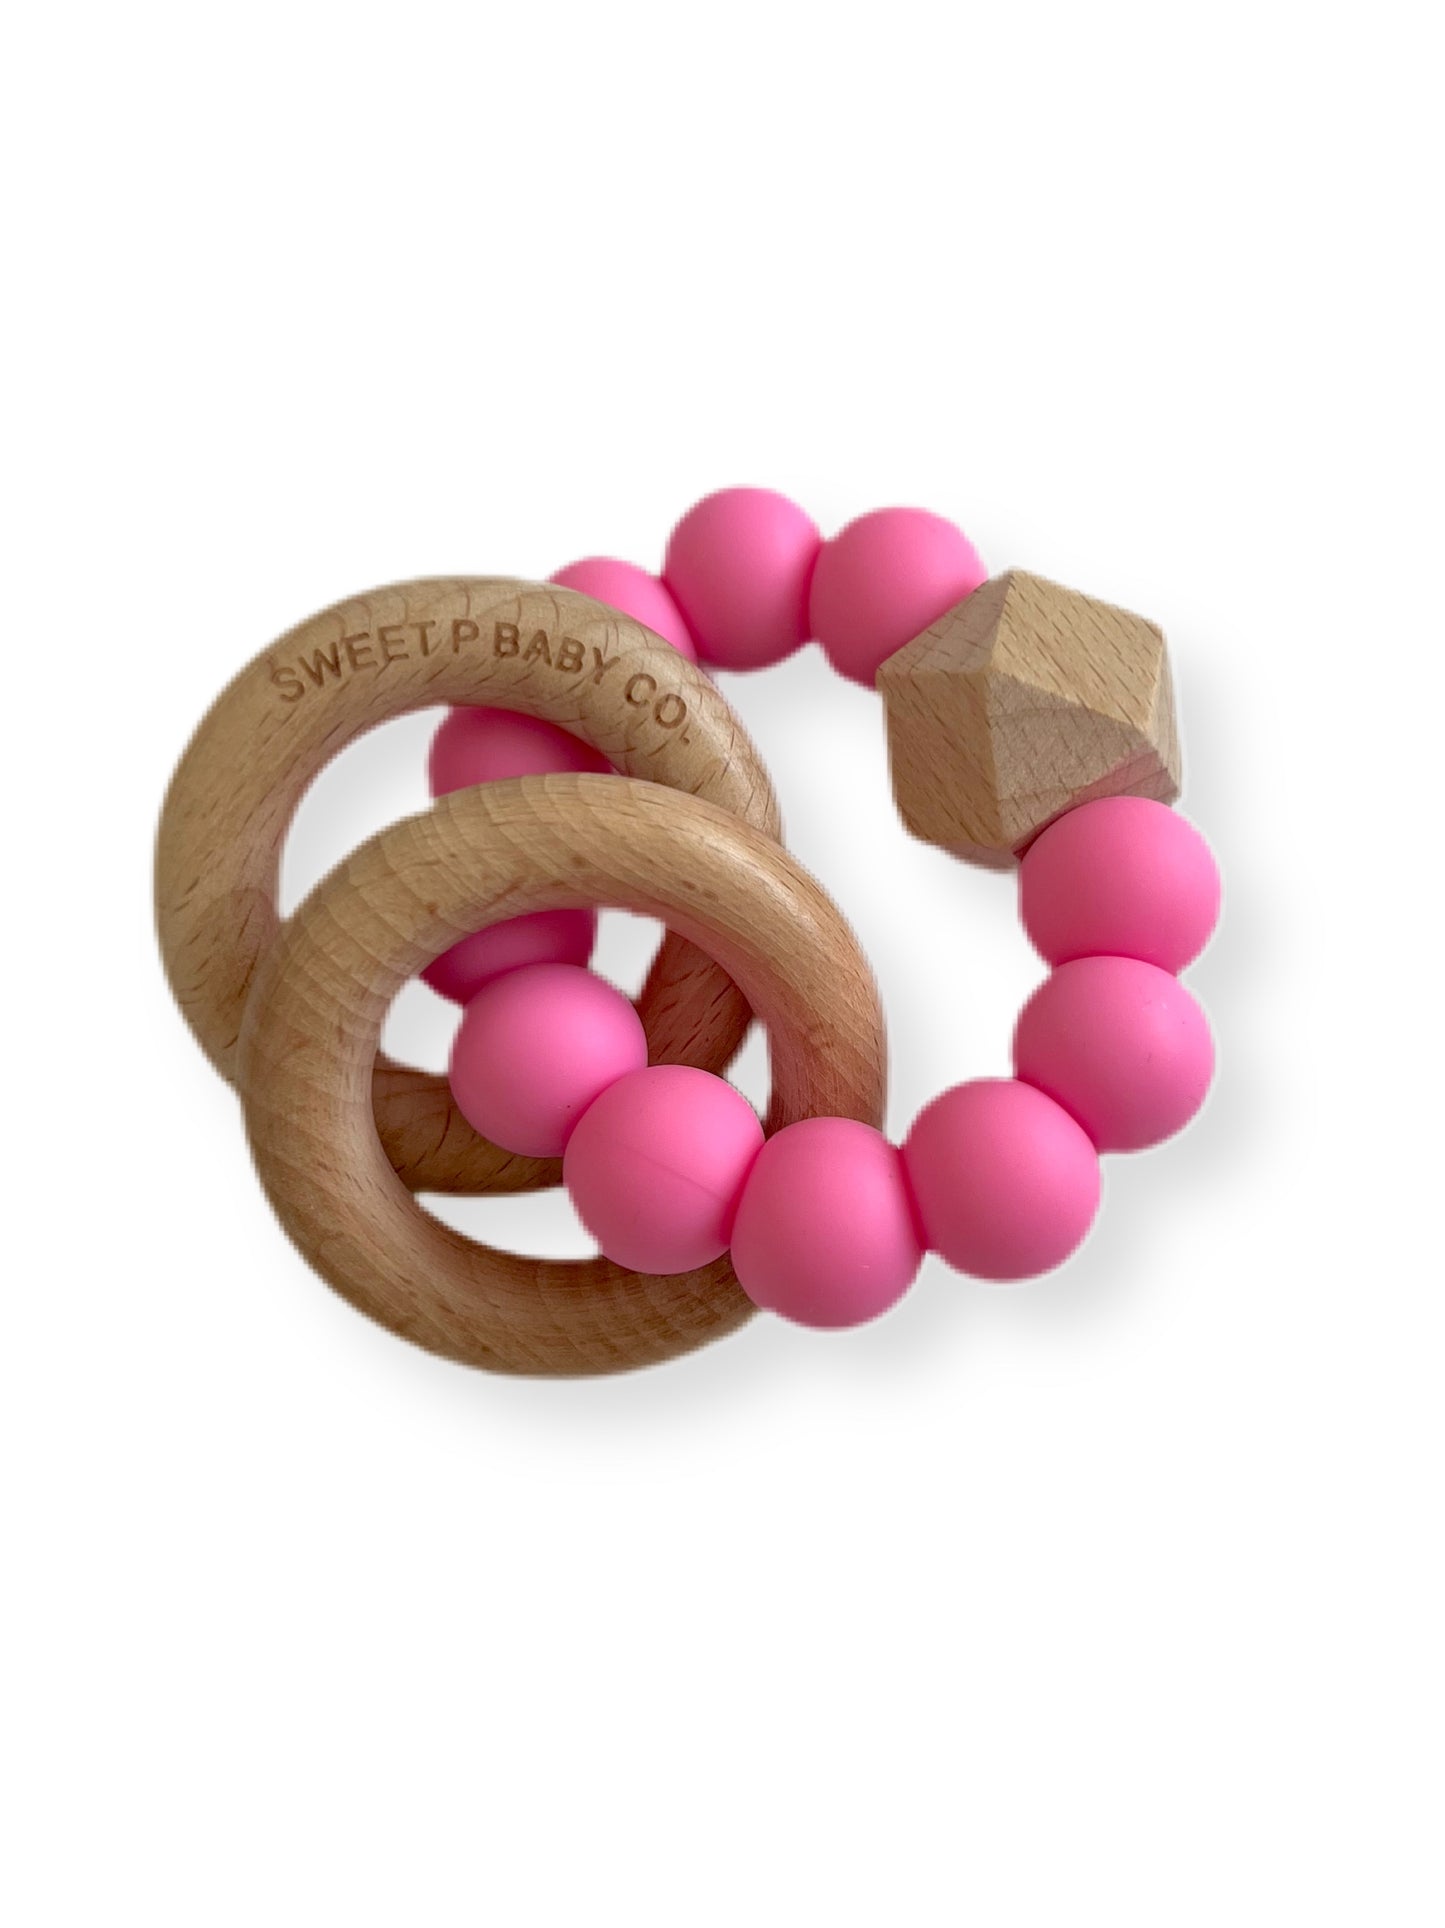 Bubblegum Wooden Teether | Wooden Ring Teether | Sweet P Baby Co.